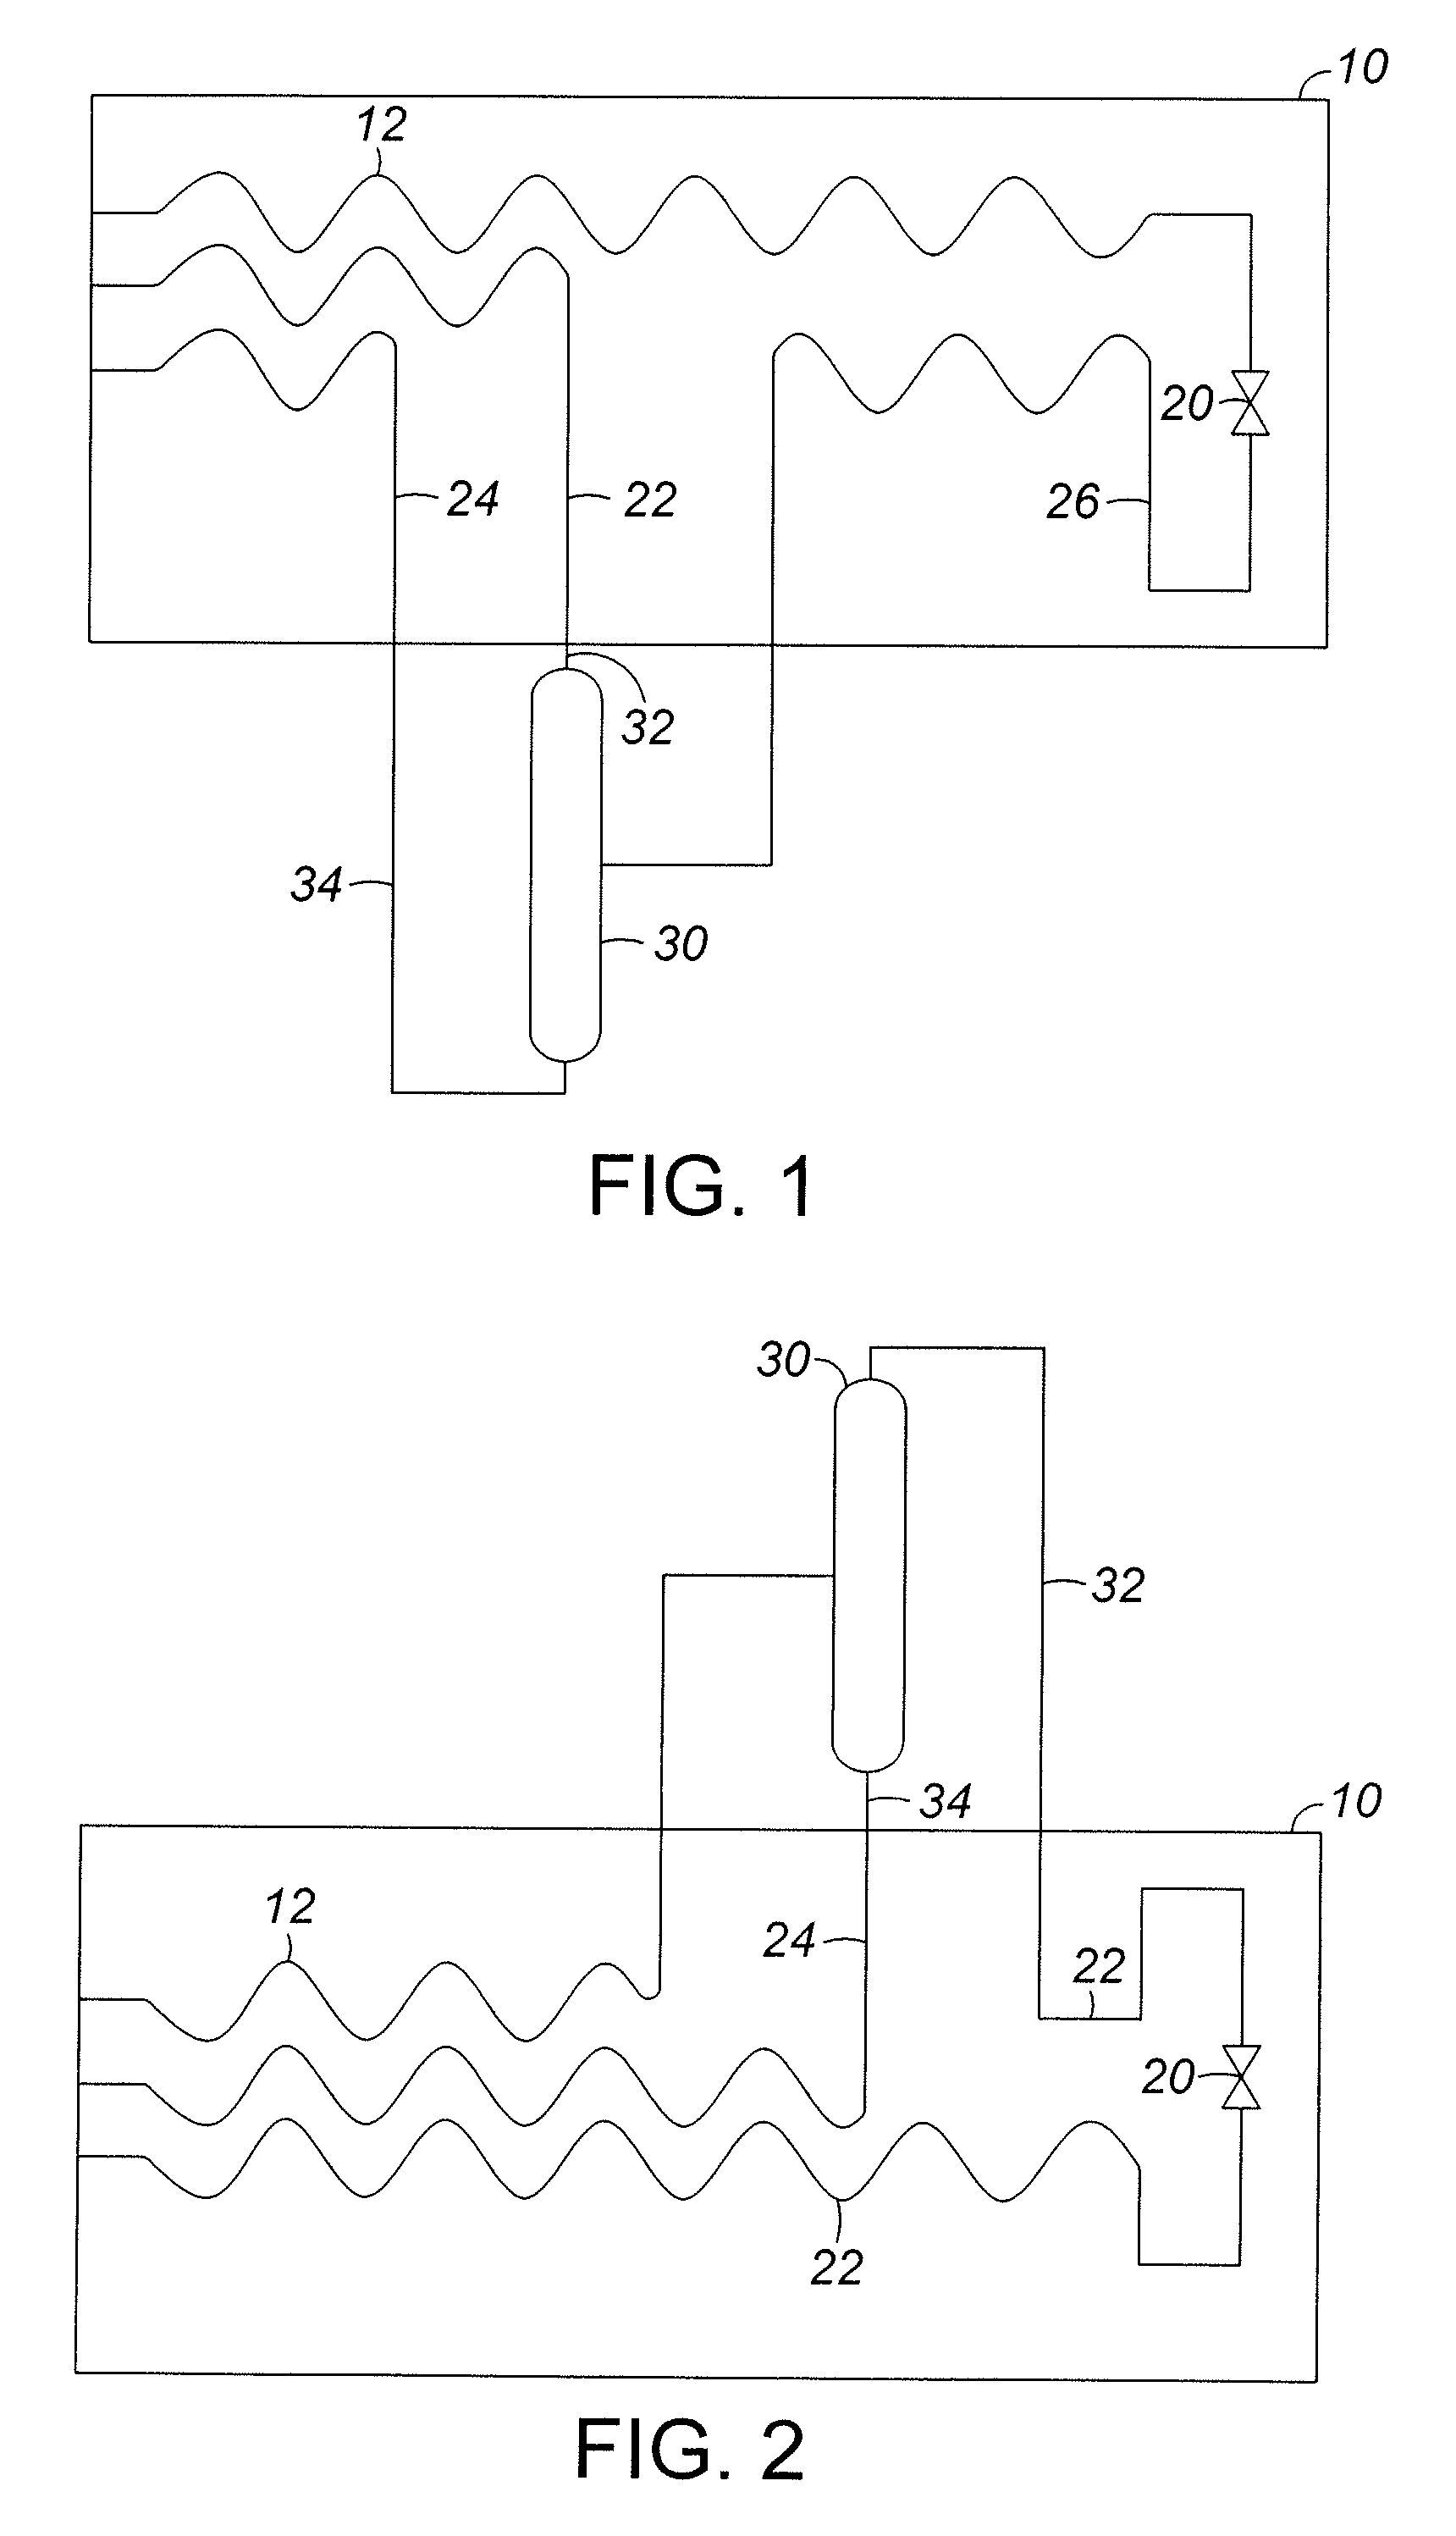 Separation of a Fluid Mixture Using Self-Cooling of the Mixture